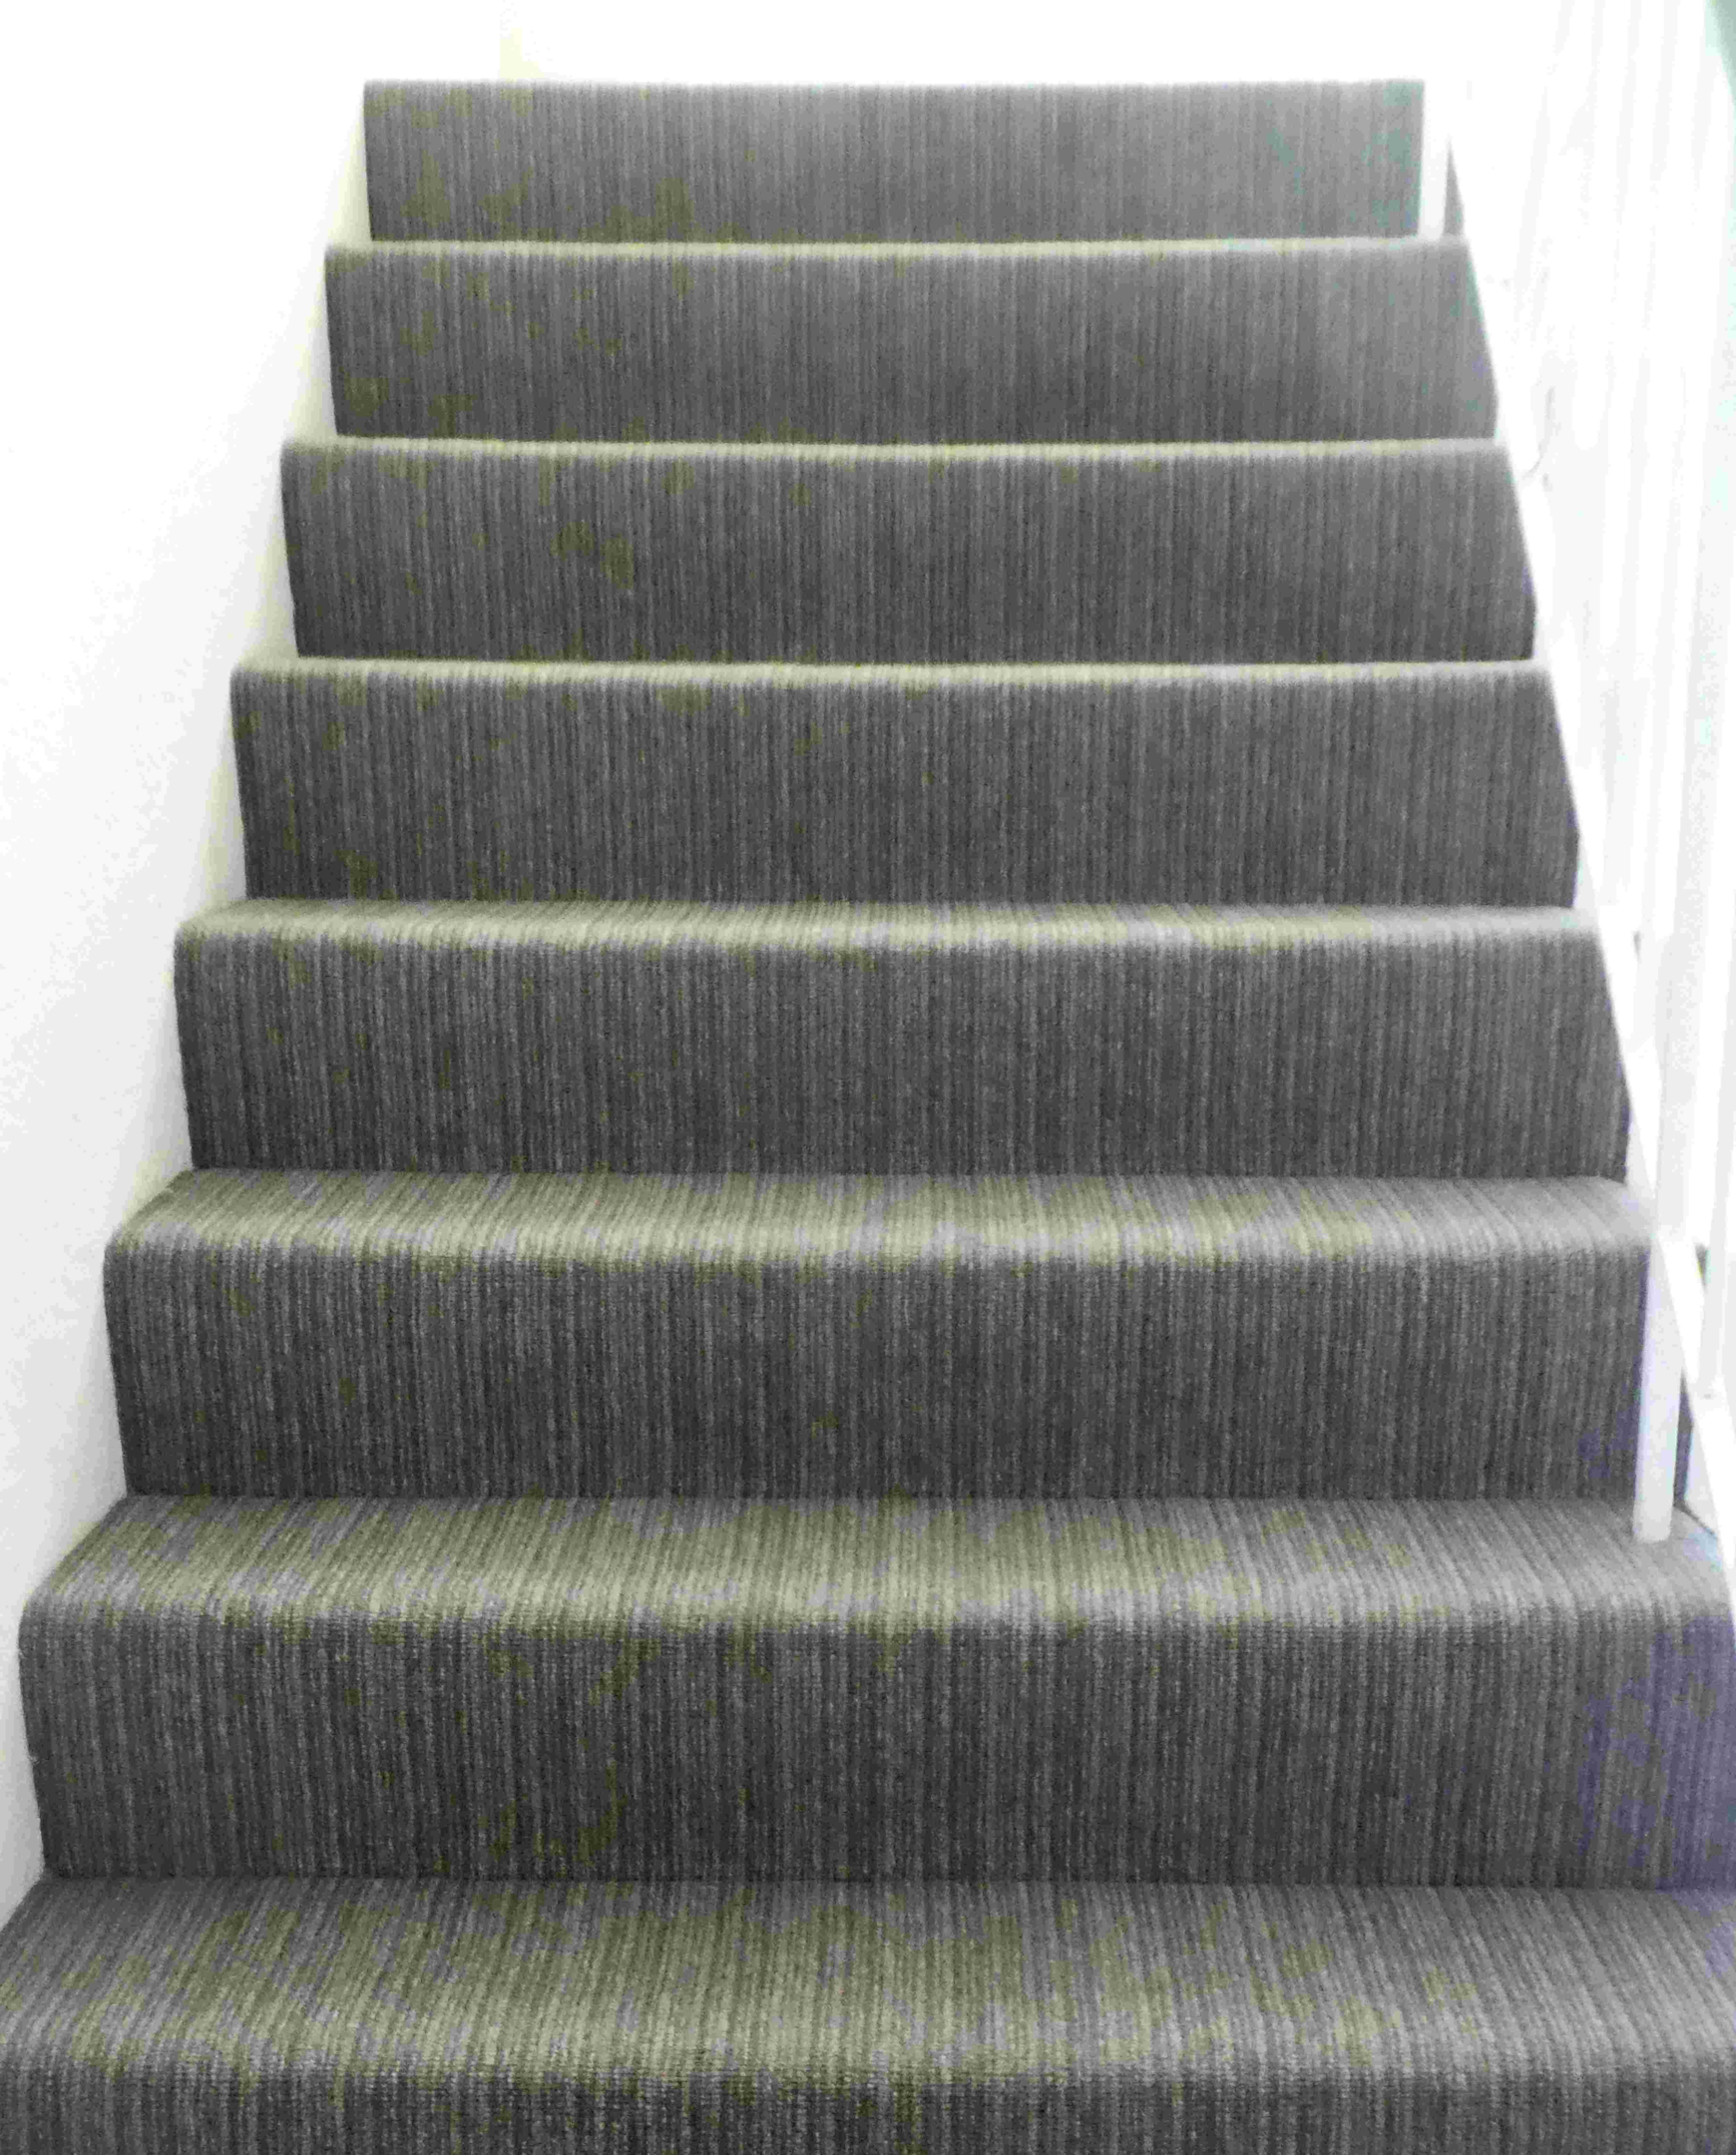 type of carpet for stairs